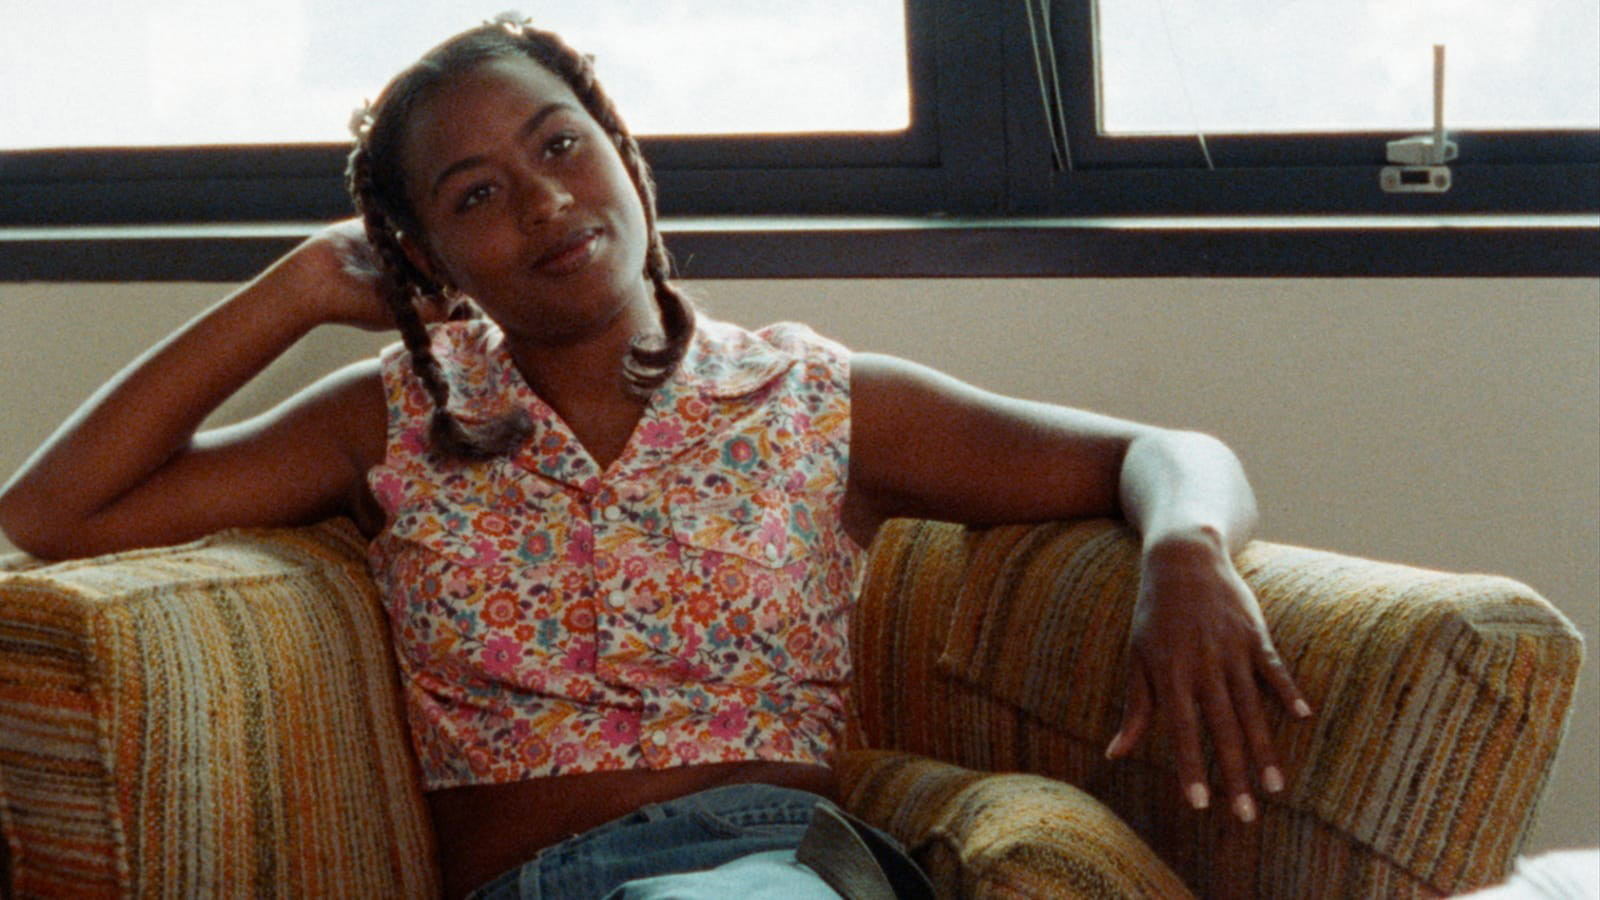 A still from the film Drylongso shows a Black woman reclining on a couch, their head resting on their right hand. They are wearing a flower-patterned blouse and look happy.